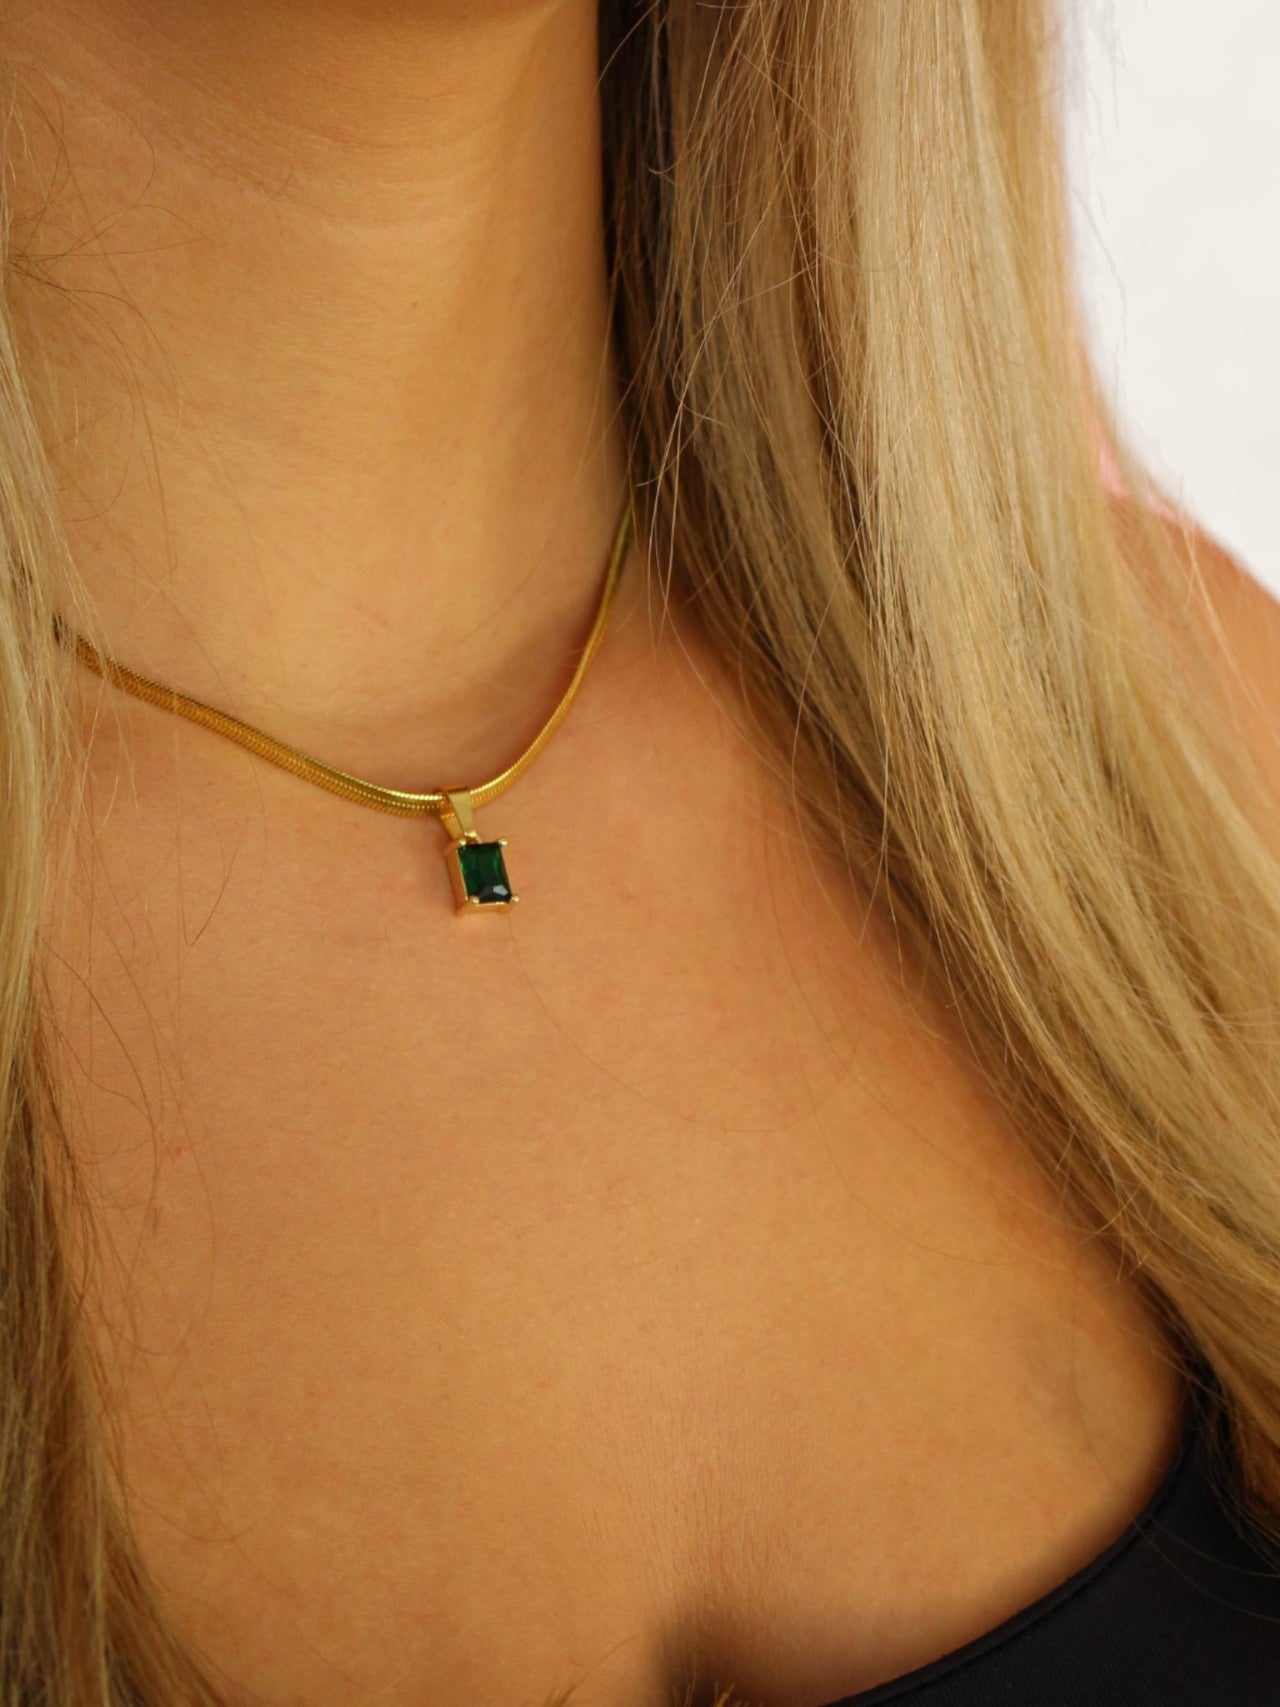 Thea Necklace - Green